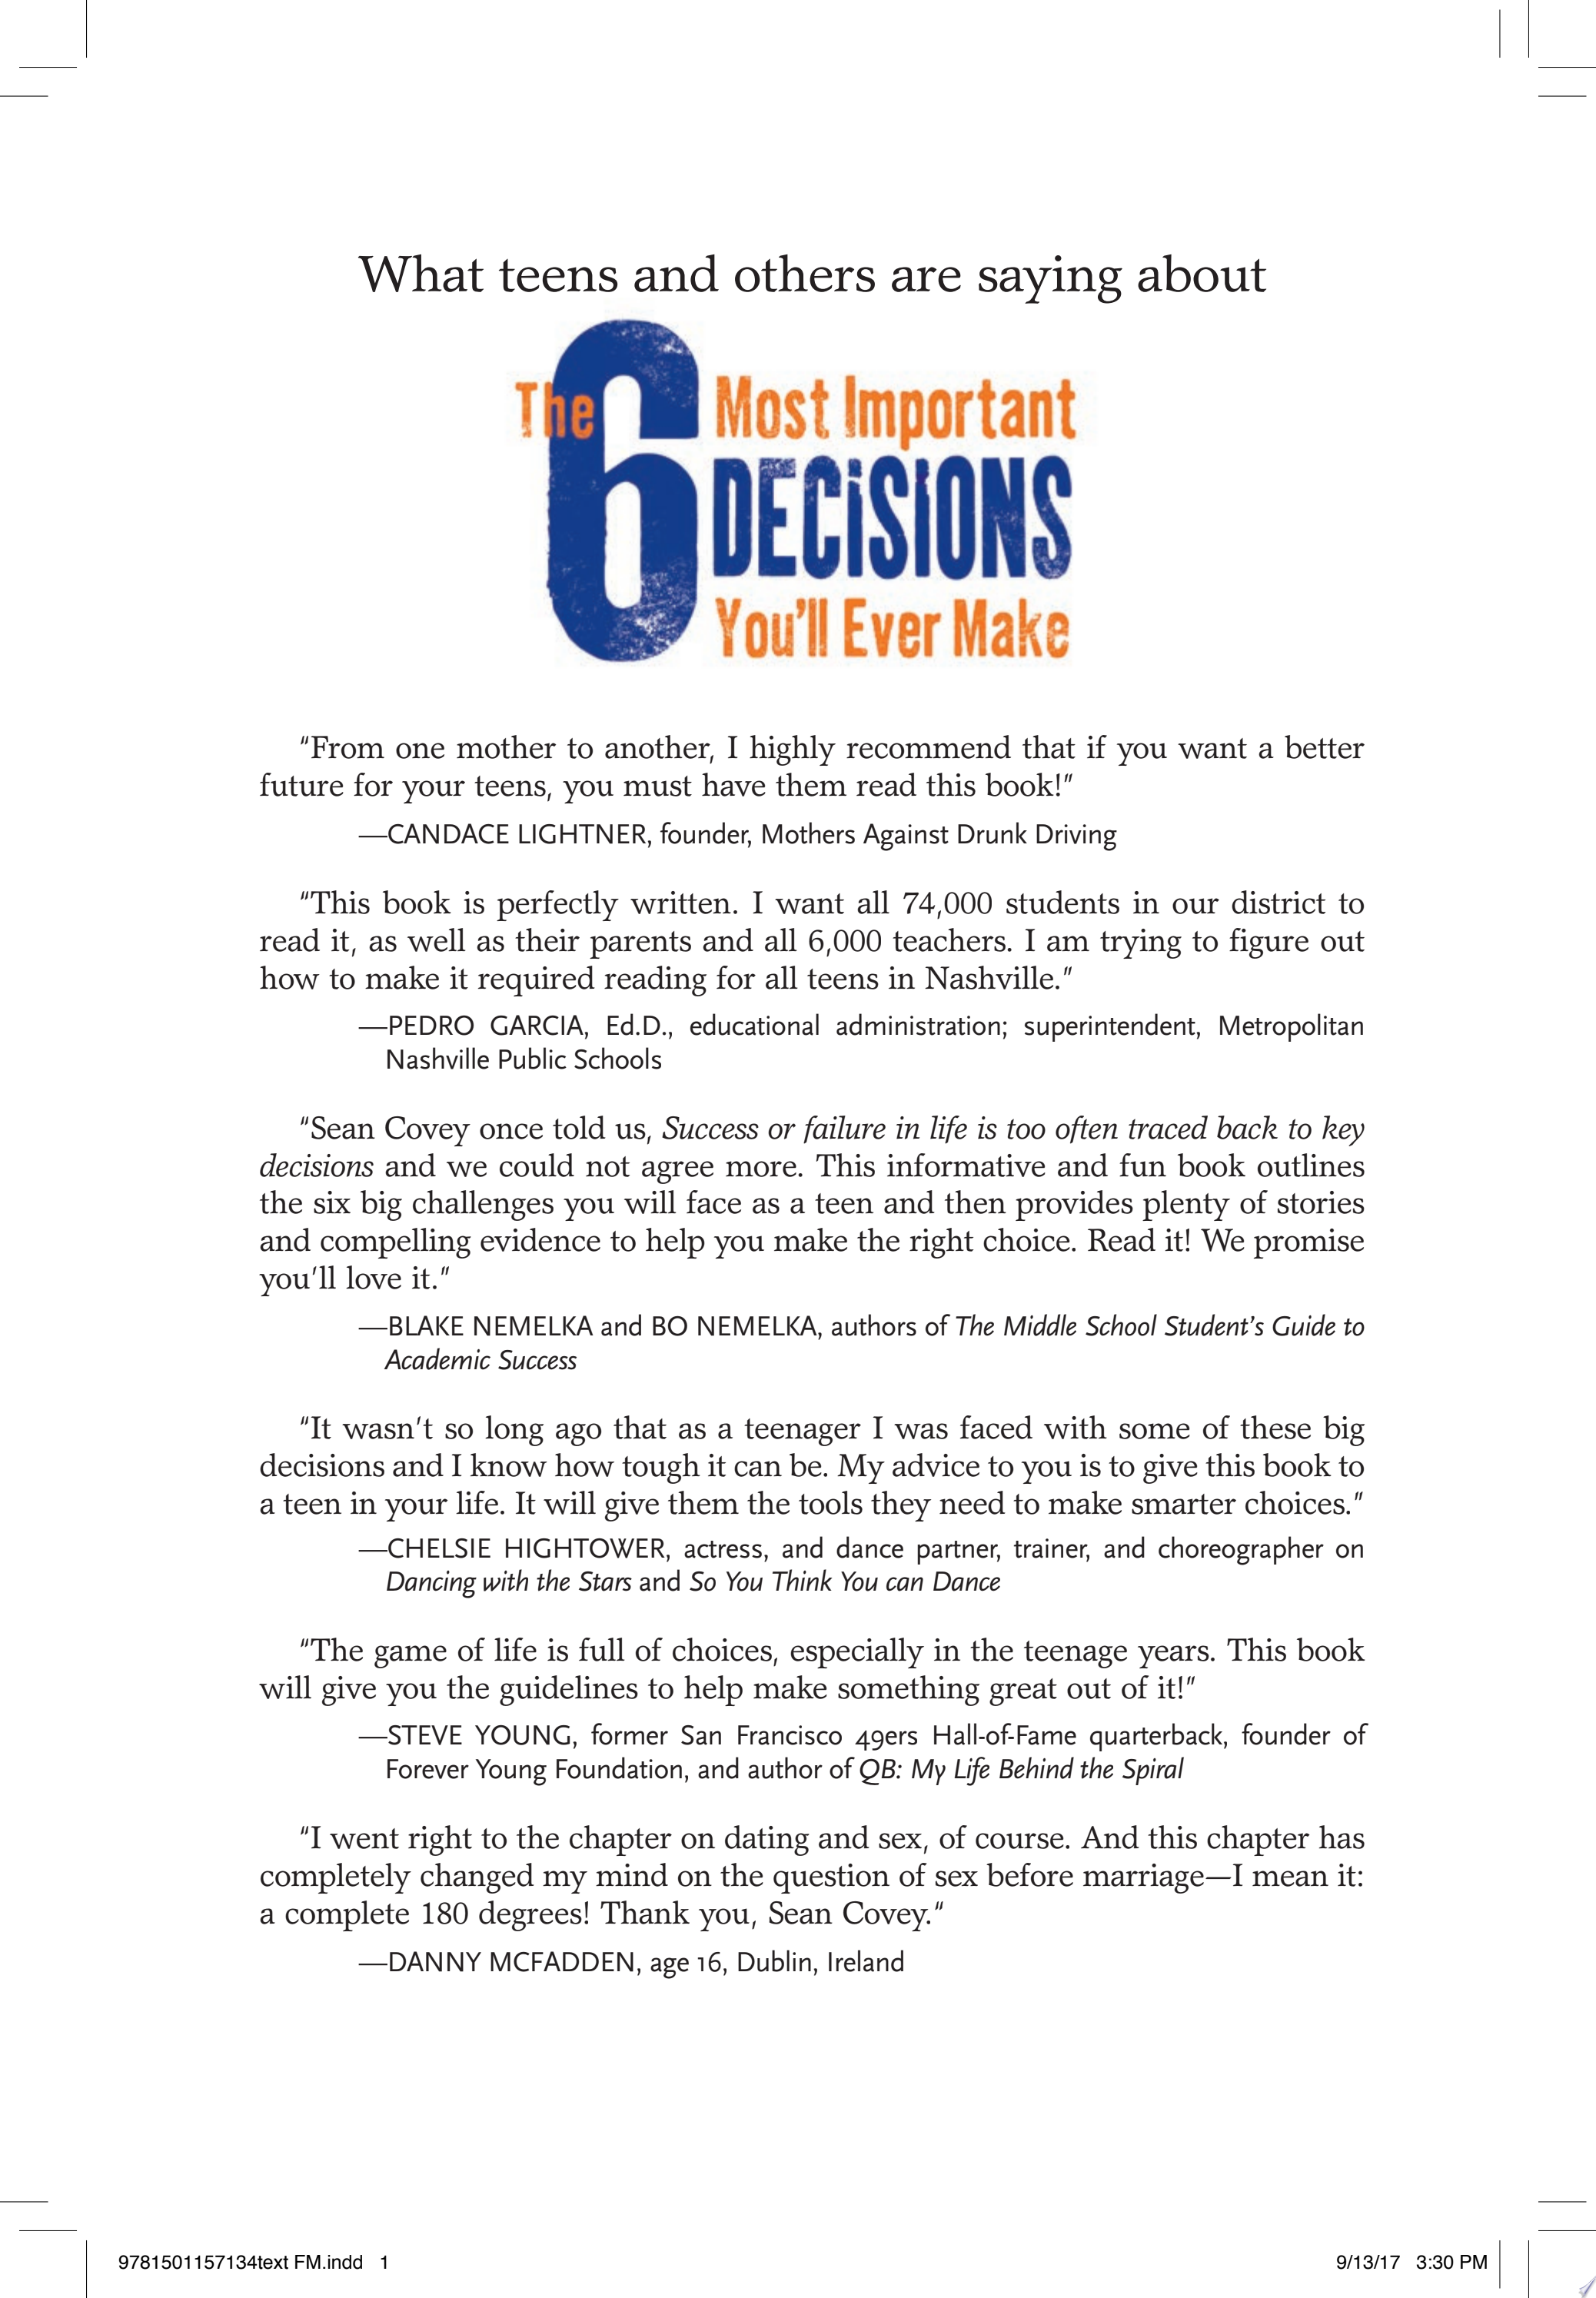 Image for "The 6 Most Important Decisions You&#039;ll Ever Make"